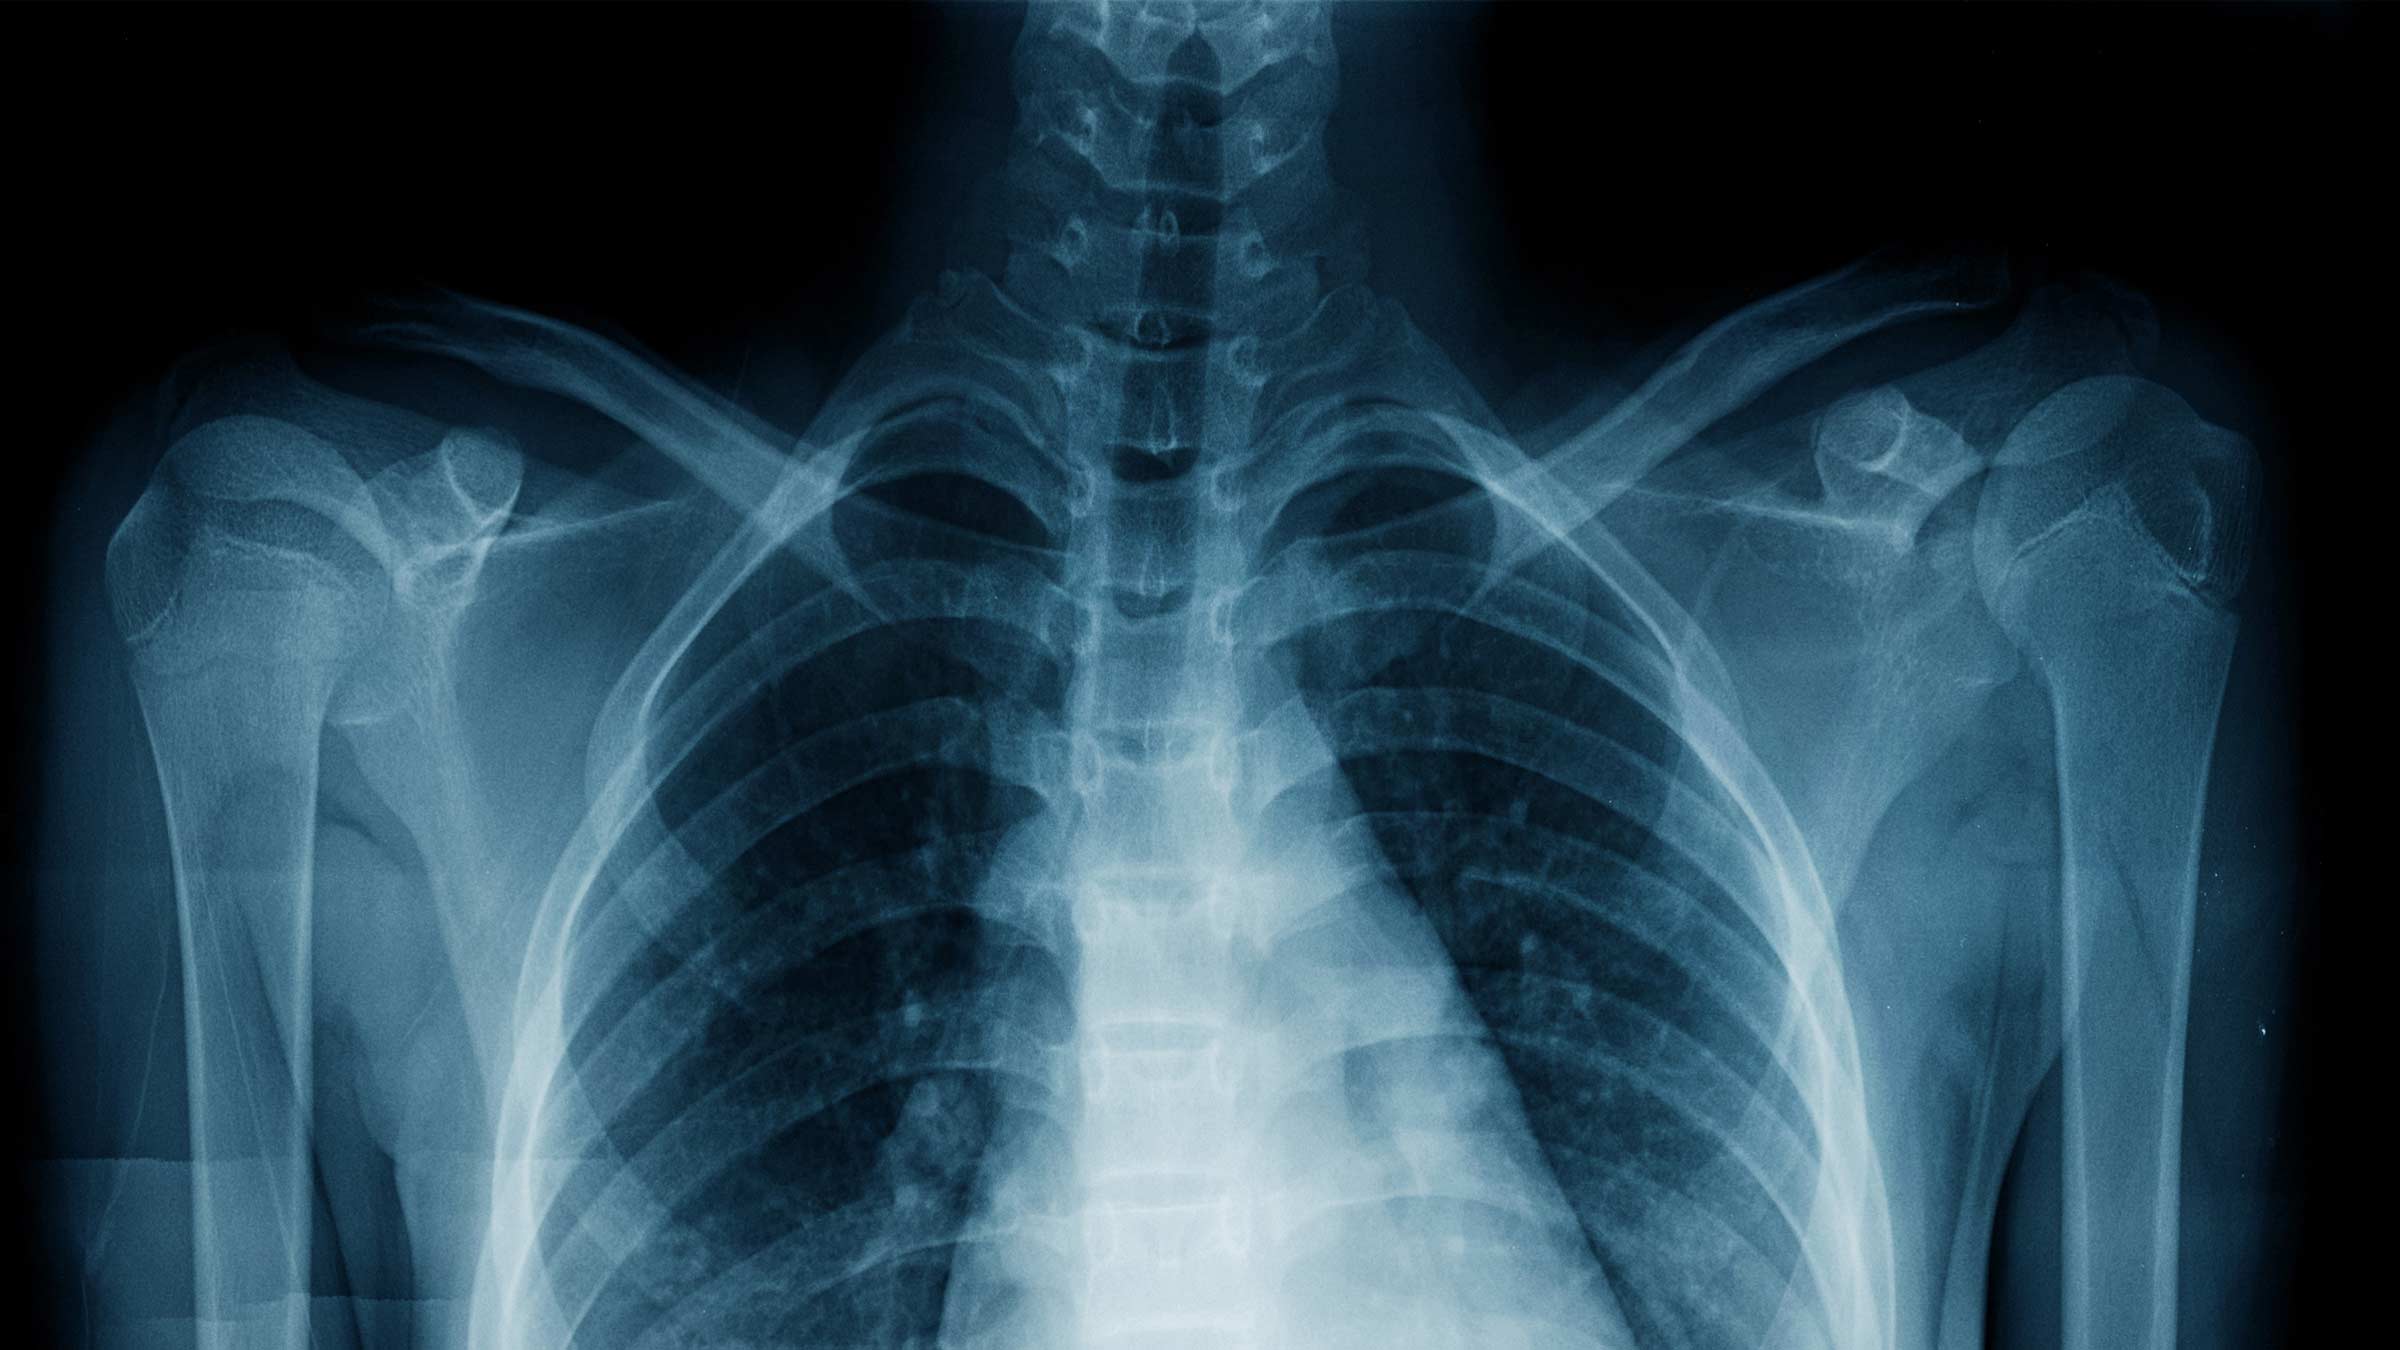 What it’s like to get an X-ray, and how to prepare